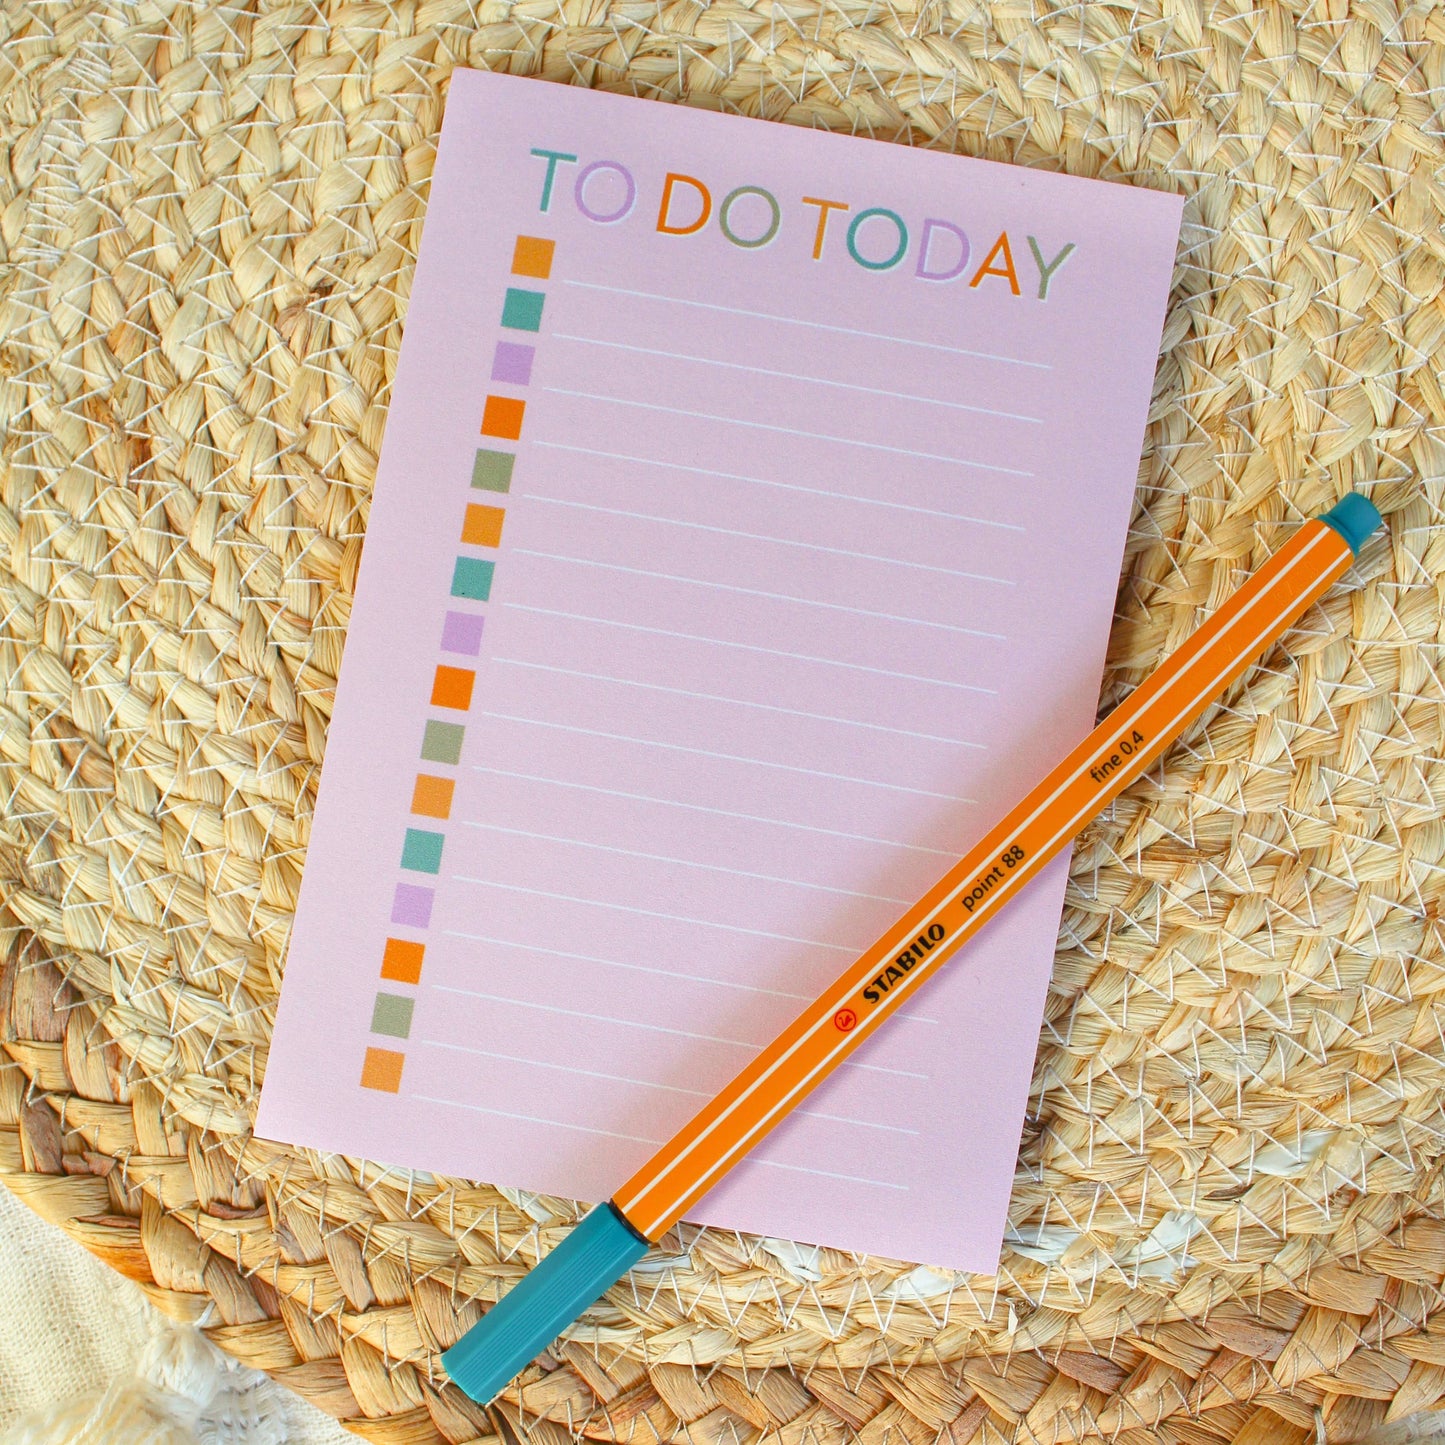 To Do Today Extra Large Post-It® Notes 4x6 in. - White Street Market